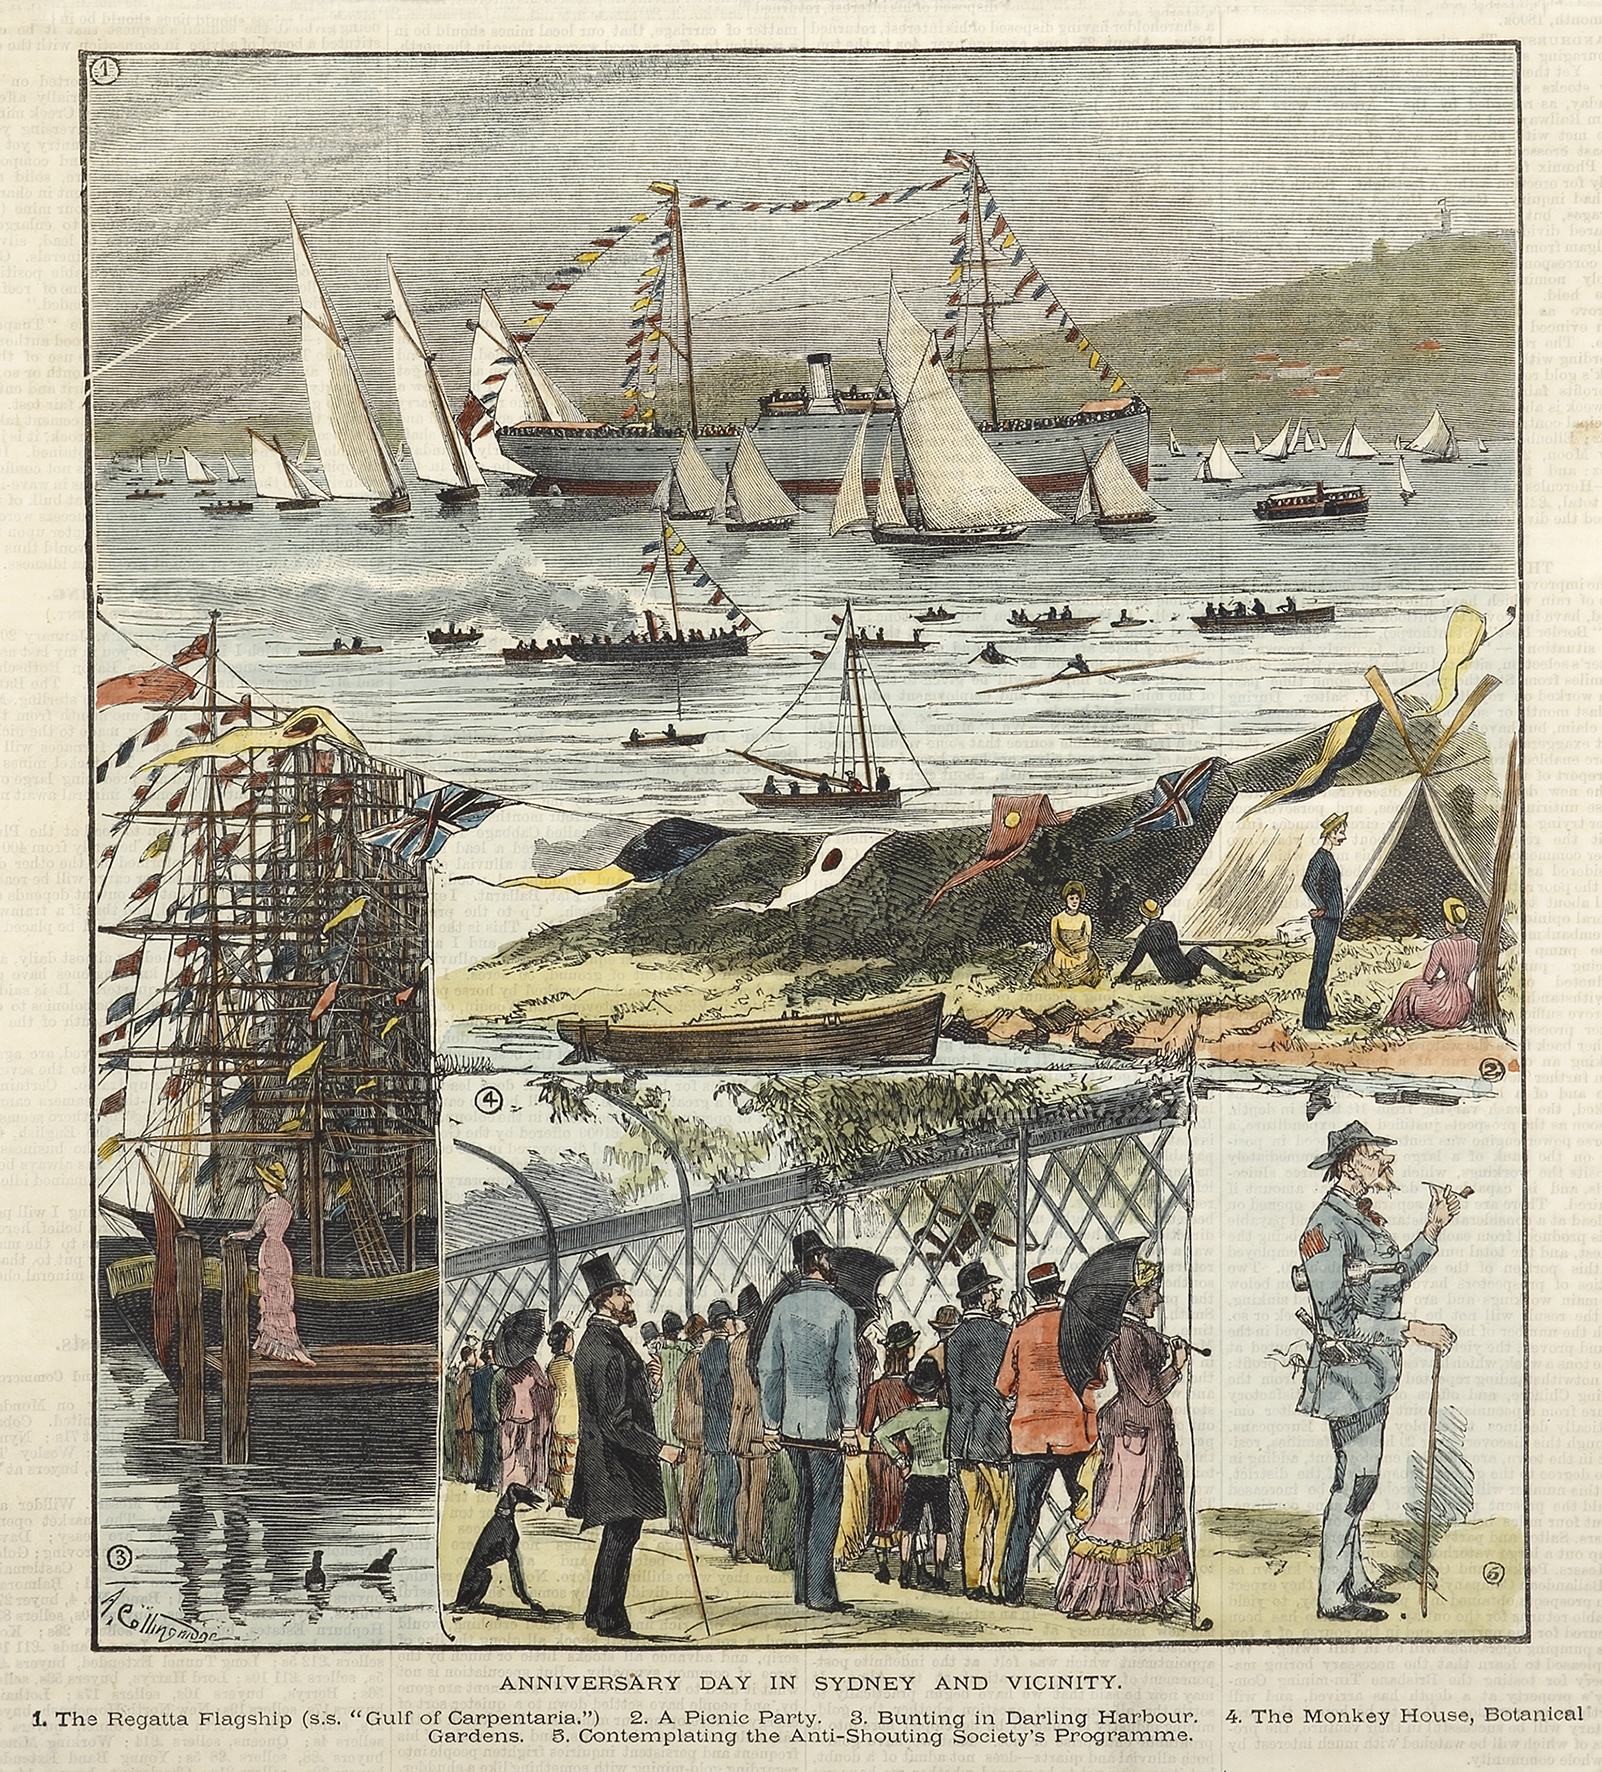 Anniversary Day in Sydney and Vicinity. - Antique View from 1882